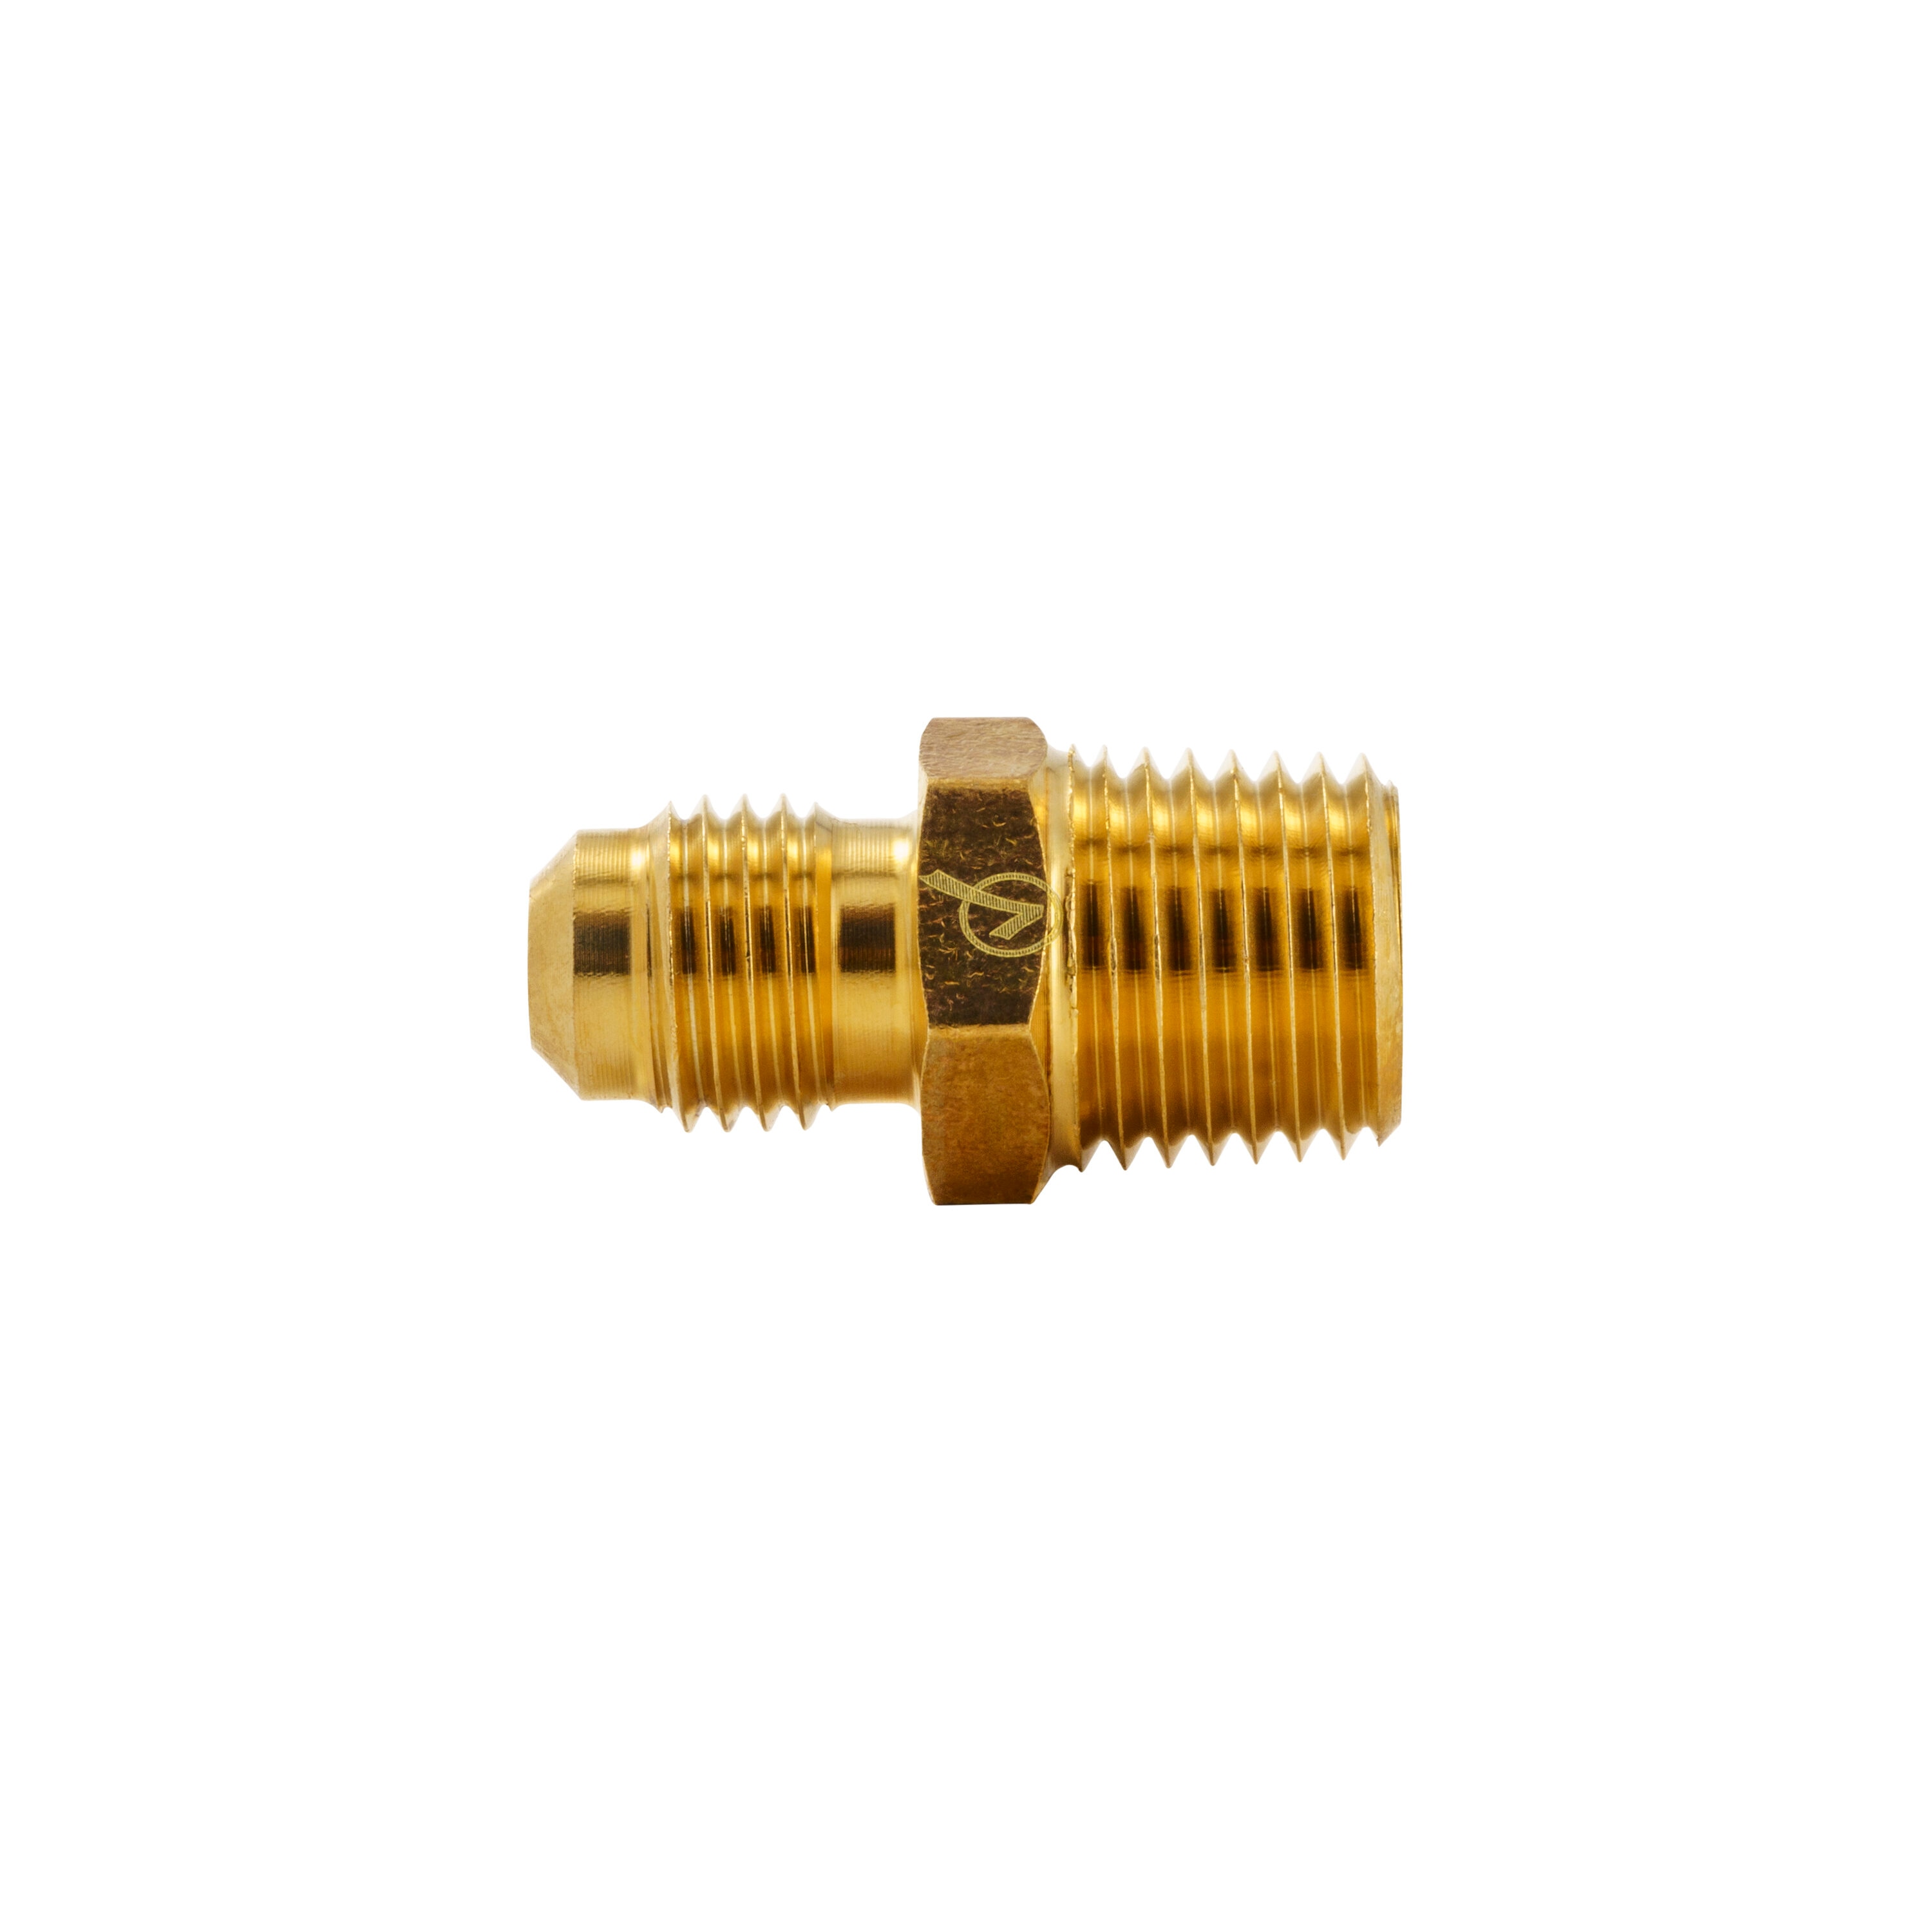 Proline Series 1/4-in x 1/4-in Threaded Union Fitting in the Brass